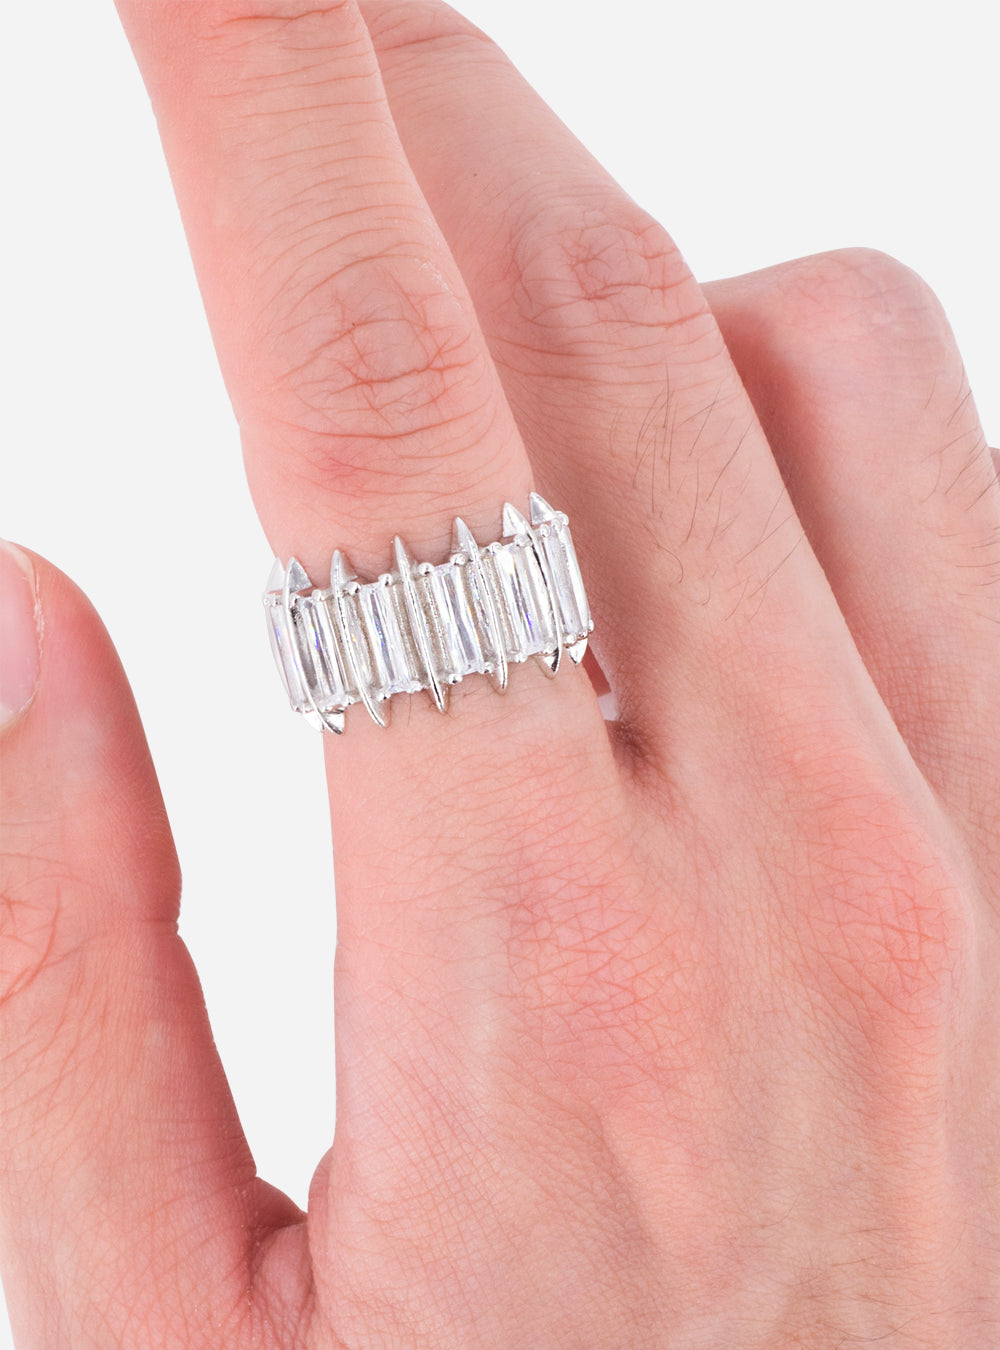 A woman's hand holding a Talon eternity ring by MIDNIGHTFACTORY.